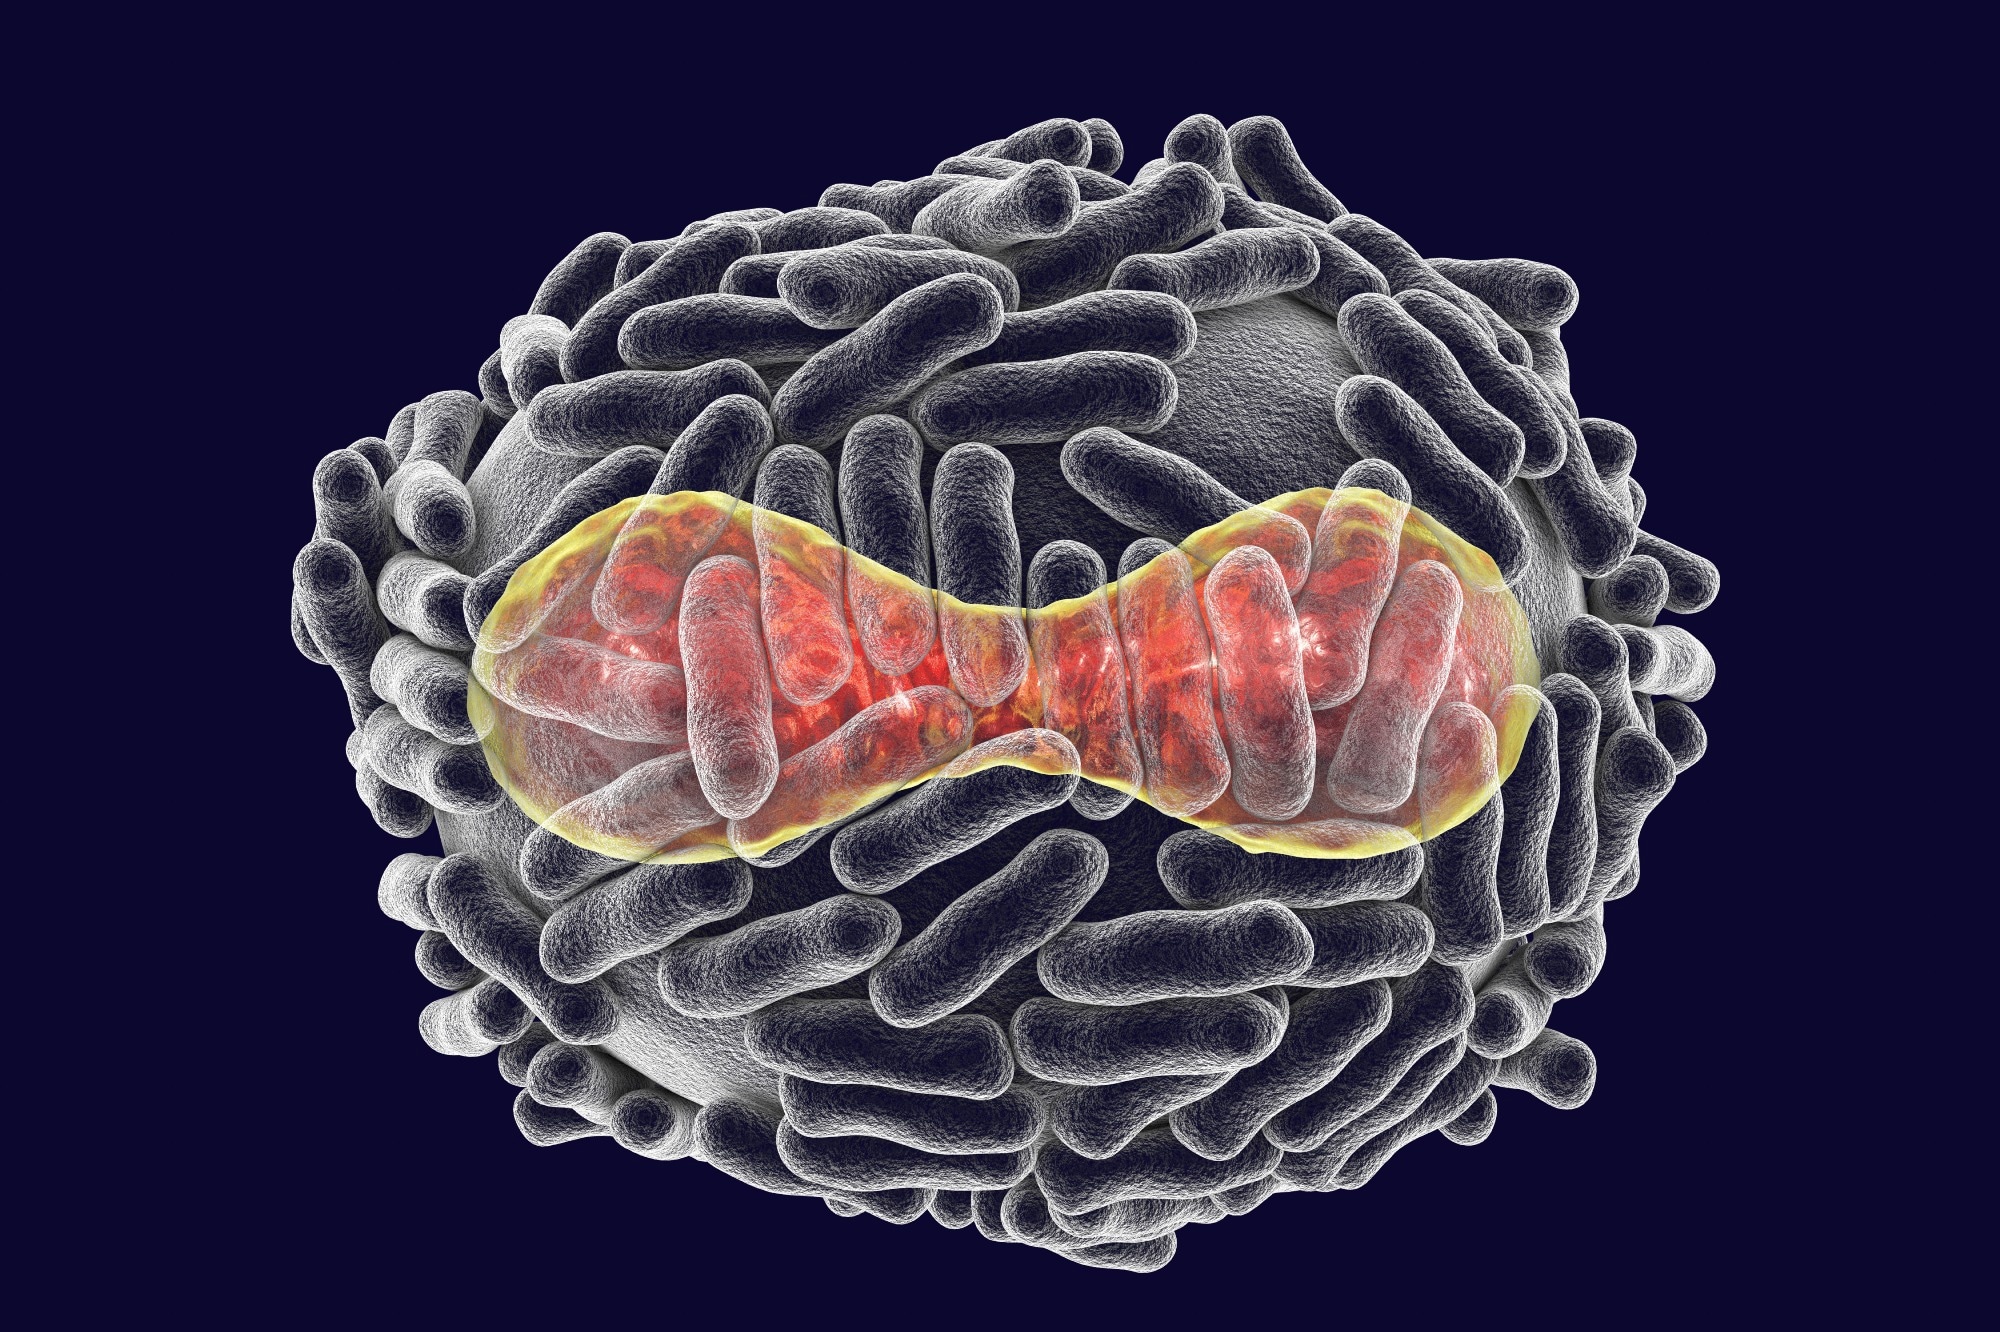 Variola virus, a virus from the Orthopoxviridae family that causes smallpox, a highly contagious disease eradicated by vaccination, 3D illustration. Image Credit: Kateryna Kon / Shutterstock